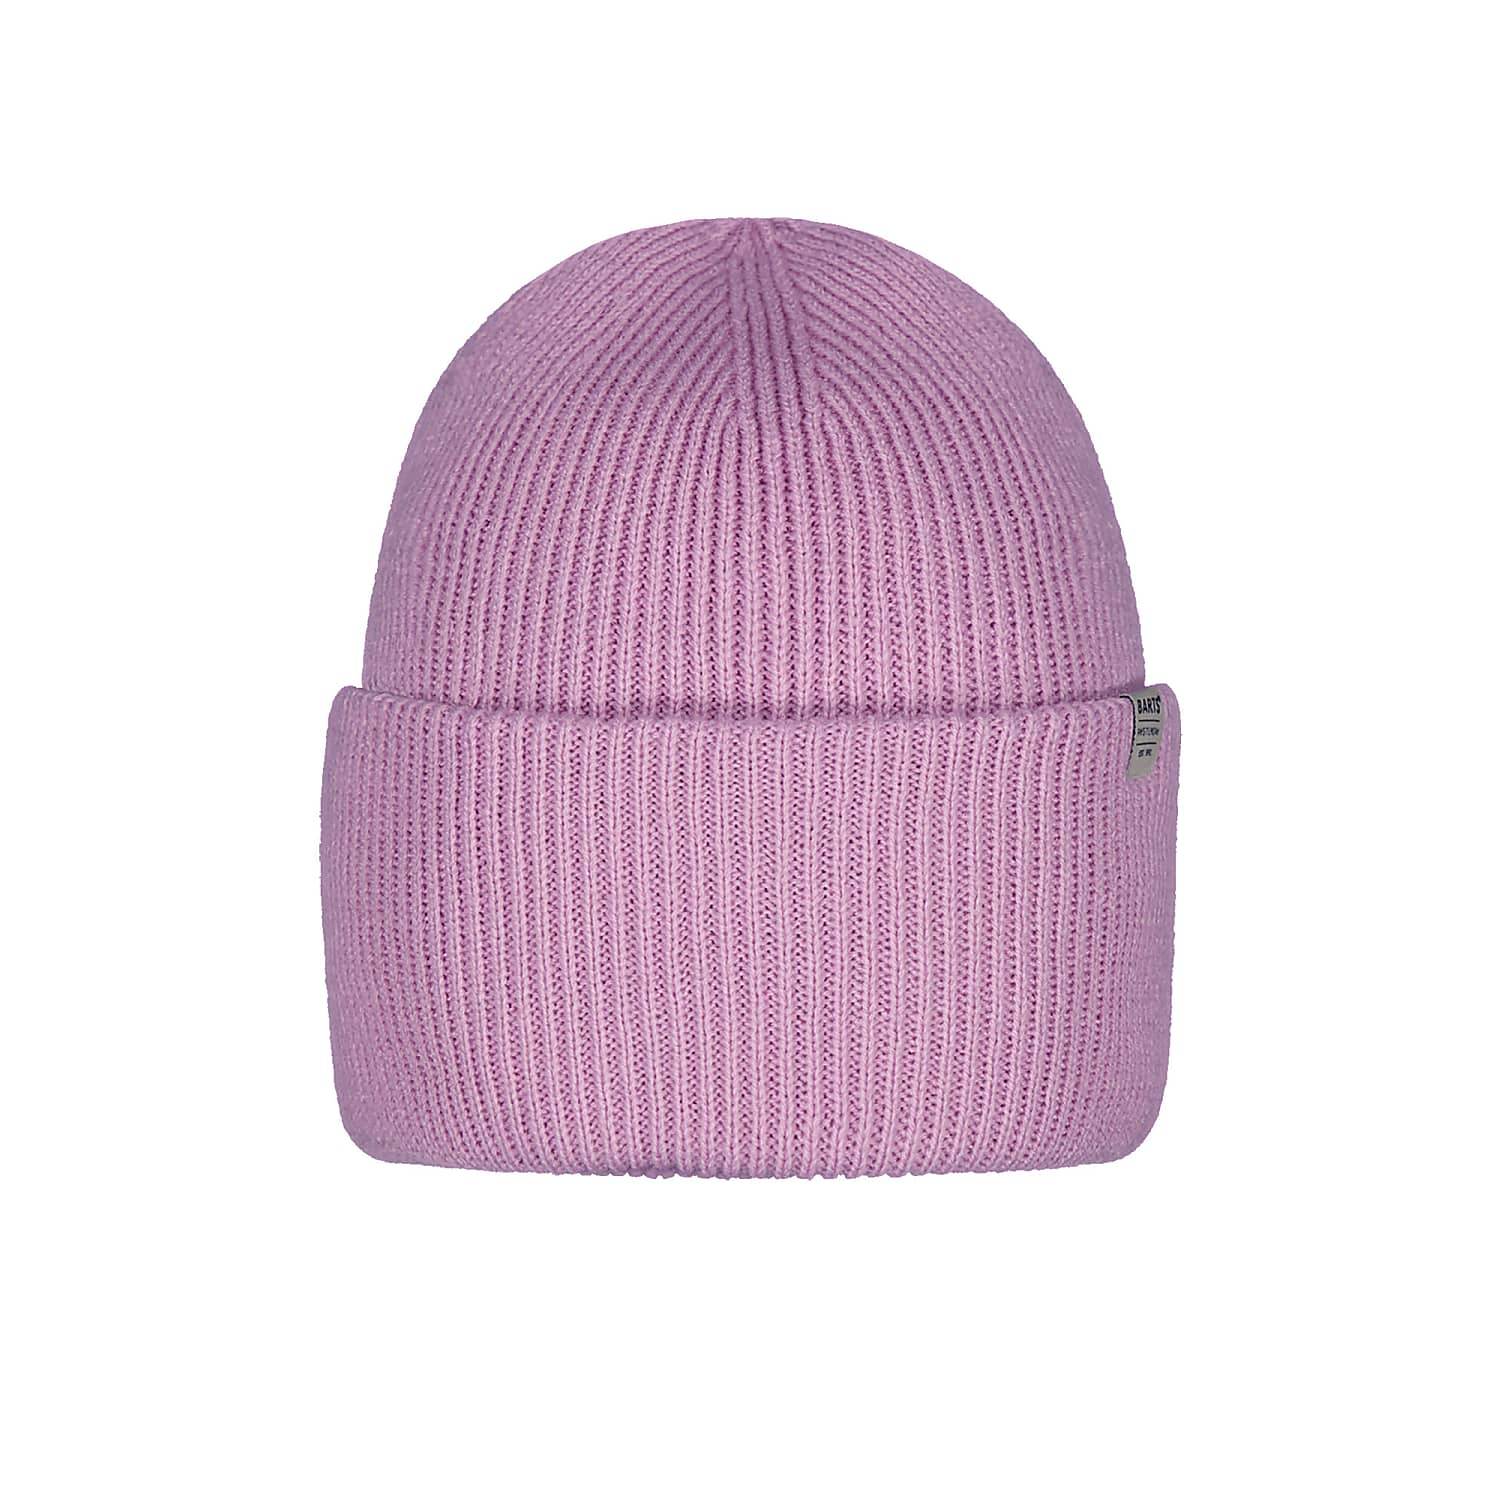 Barts HAVENO BEANIE, Orchid - Fast and cheap shipping